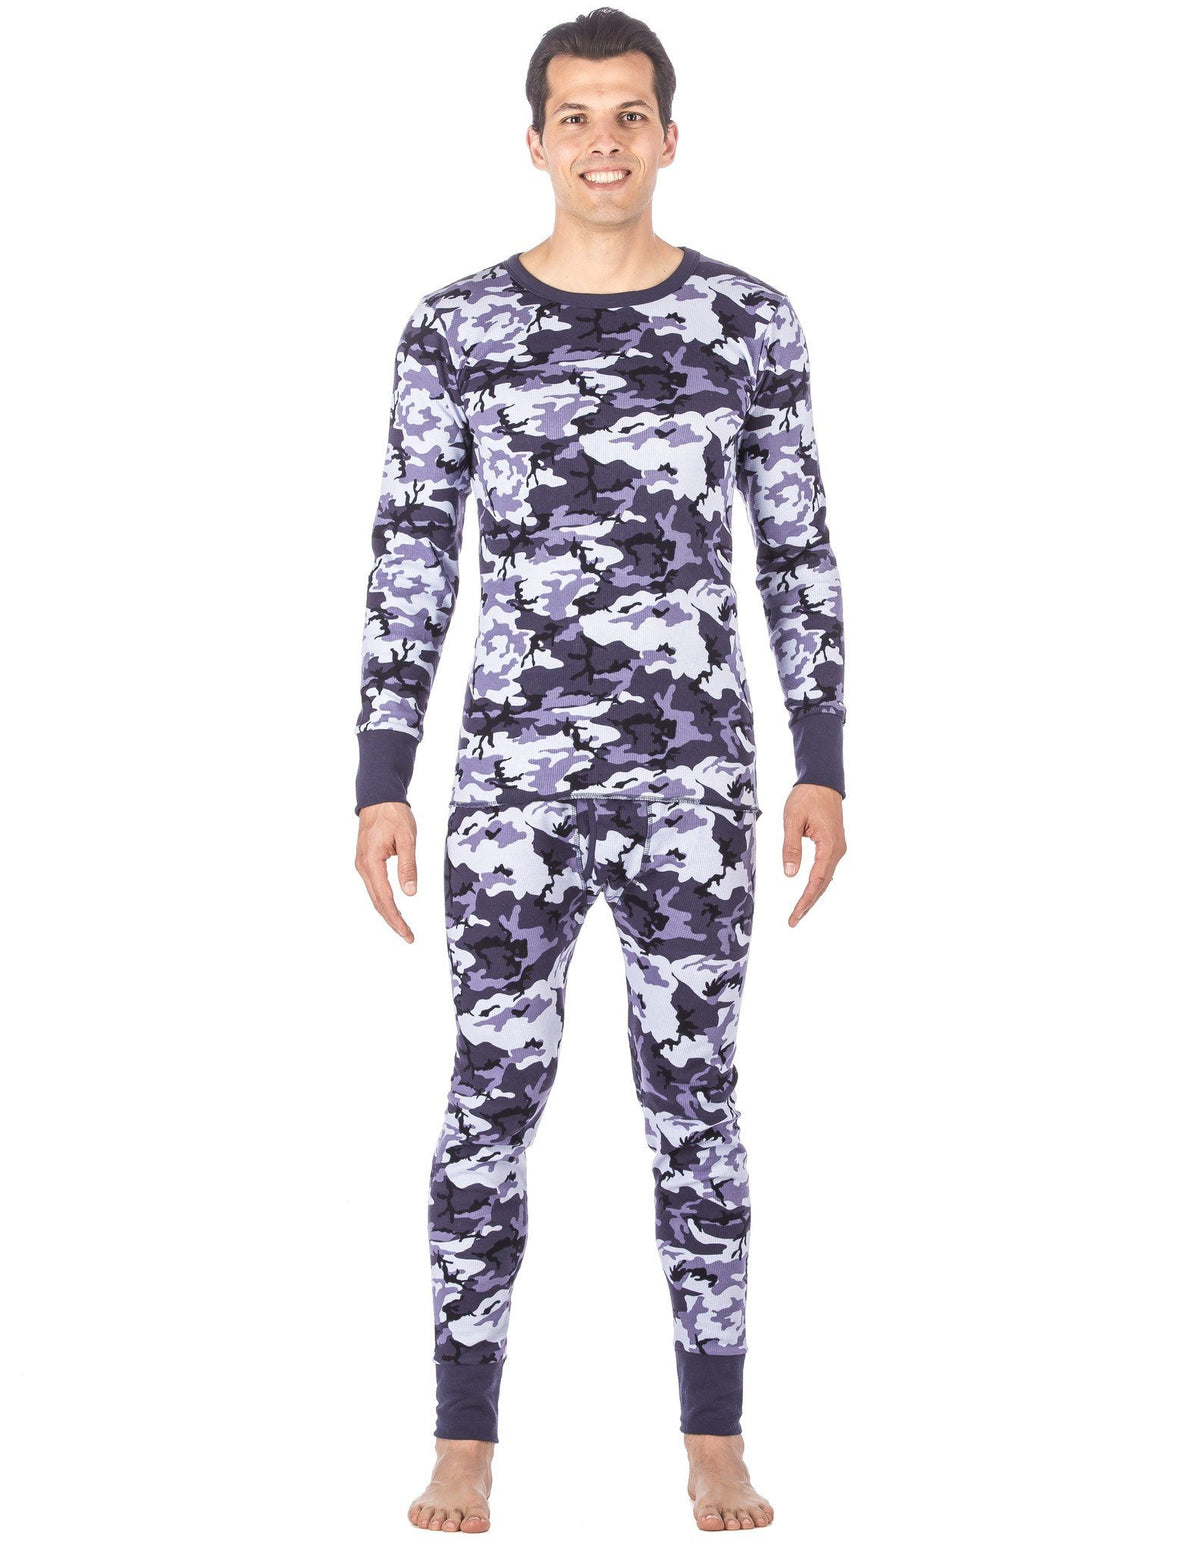 Men's Classic Waffle Knit Thermal Top and Bottom Set - Camo Blue